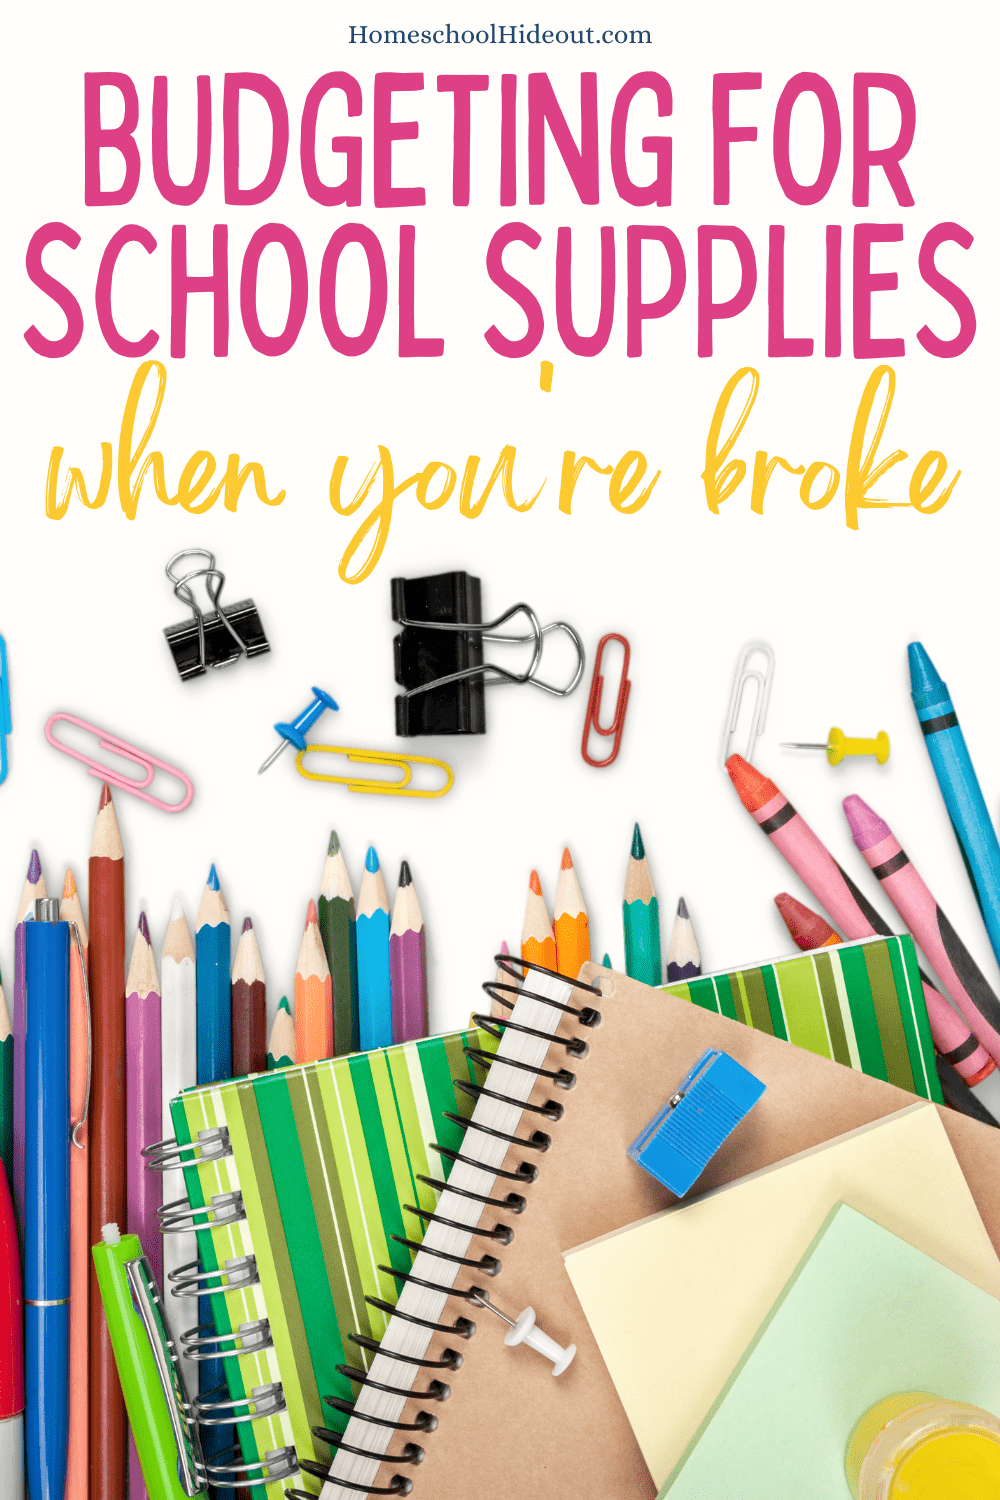 QoD: Avg. cost of school supplies and fees for HS student? - Blog